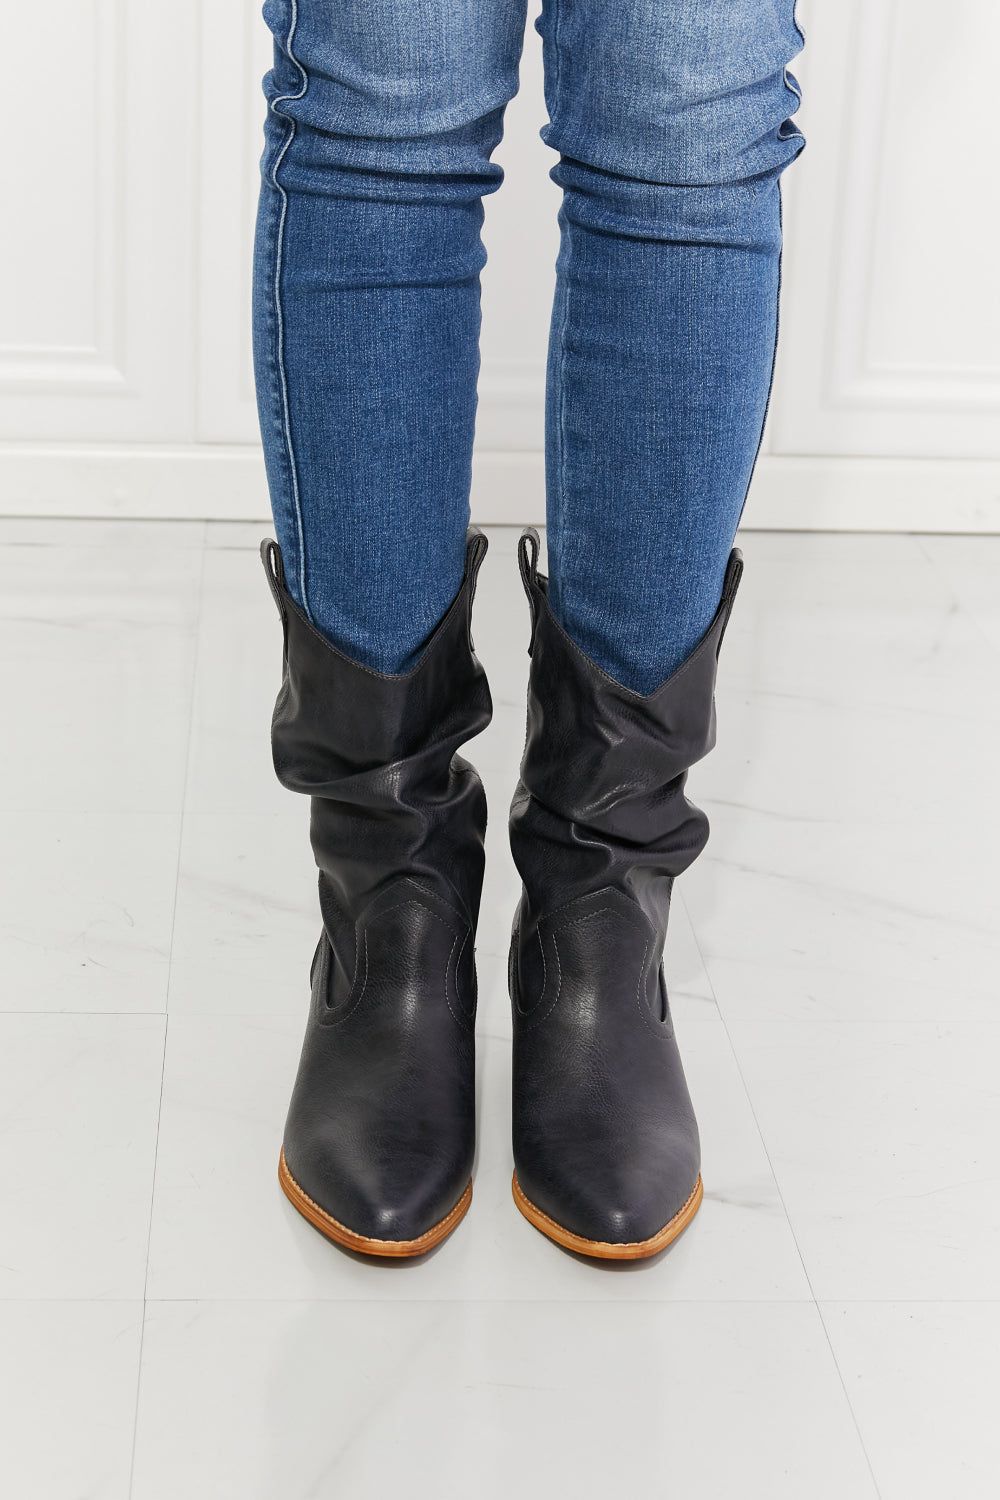 MMShoes Better in Texas Scrunch Cowboy Boots in Navy - nailedmoms